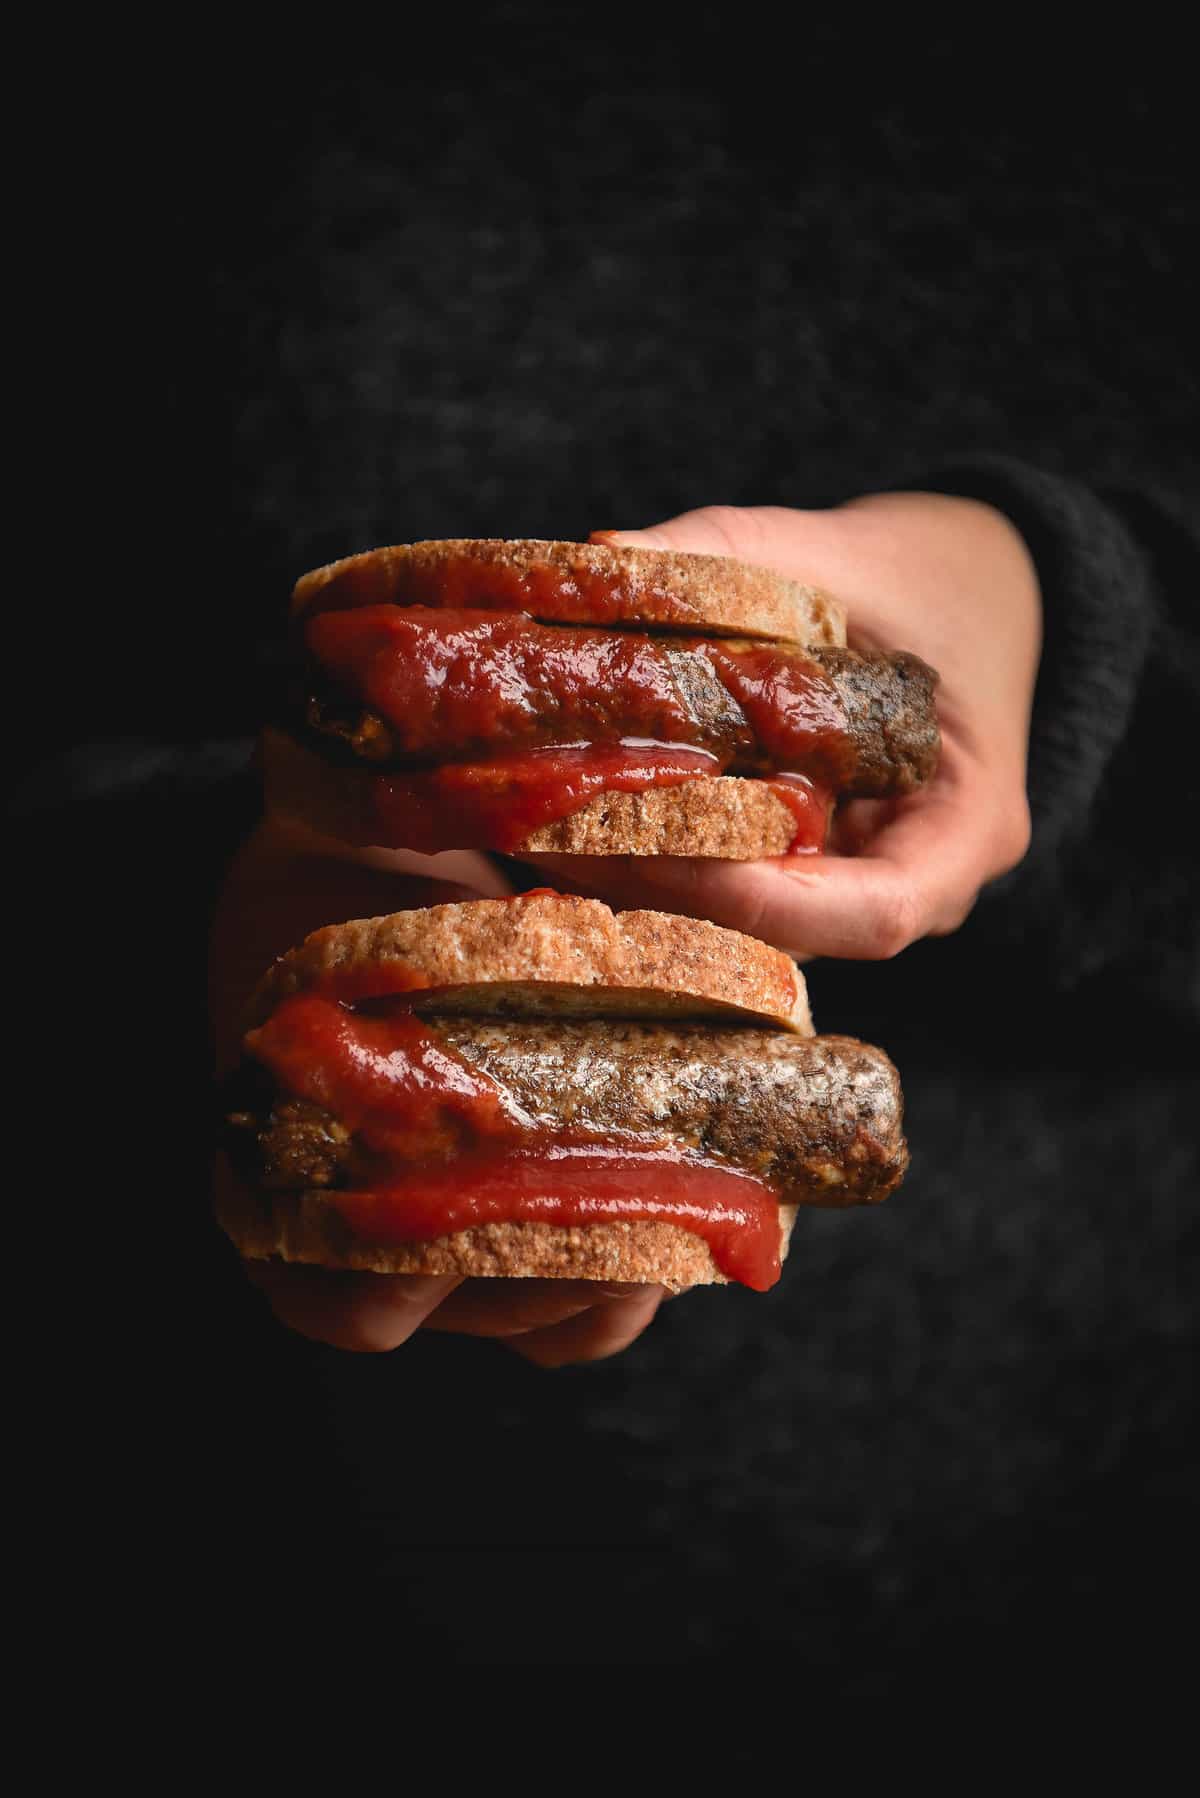 Vegan, gluten free sausages from www.georgeats.com. Grain and nut free as well as FODMAP friendly.